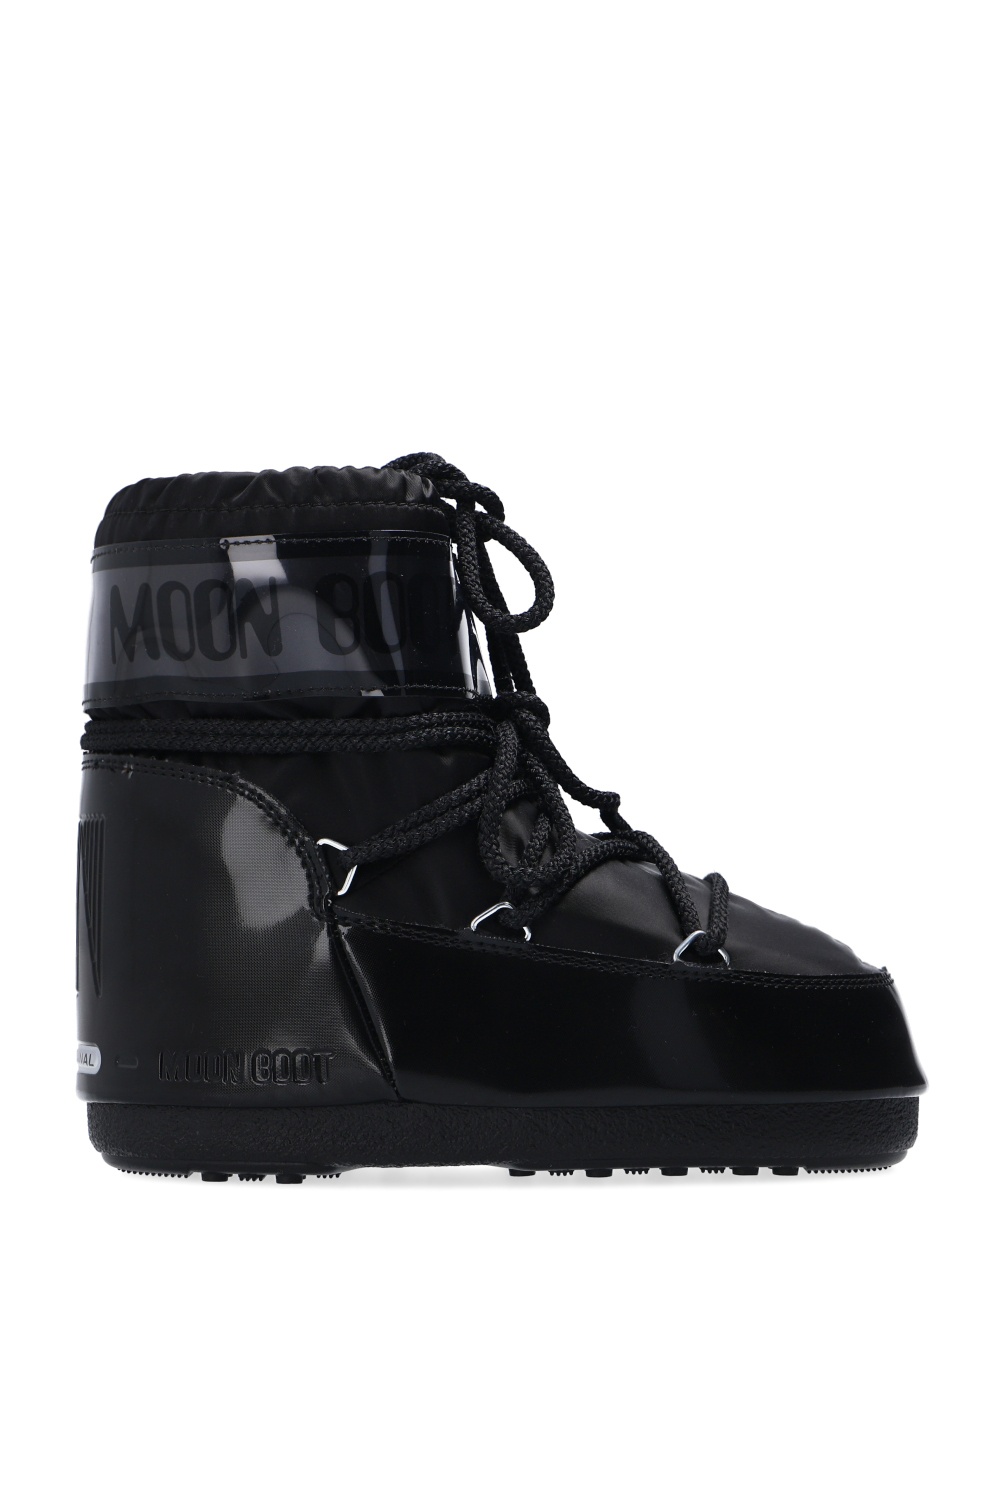 moon boot classic low snow boots